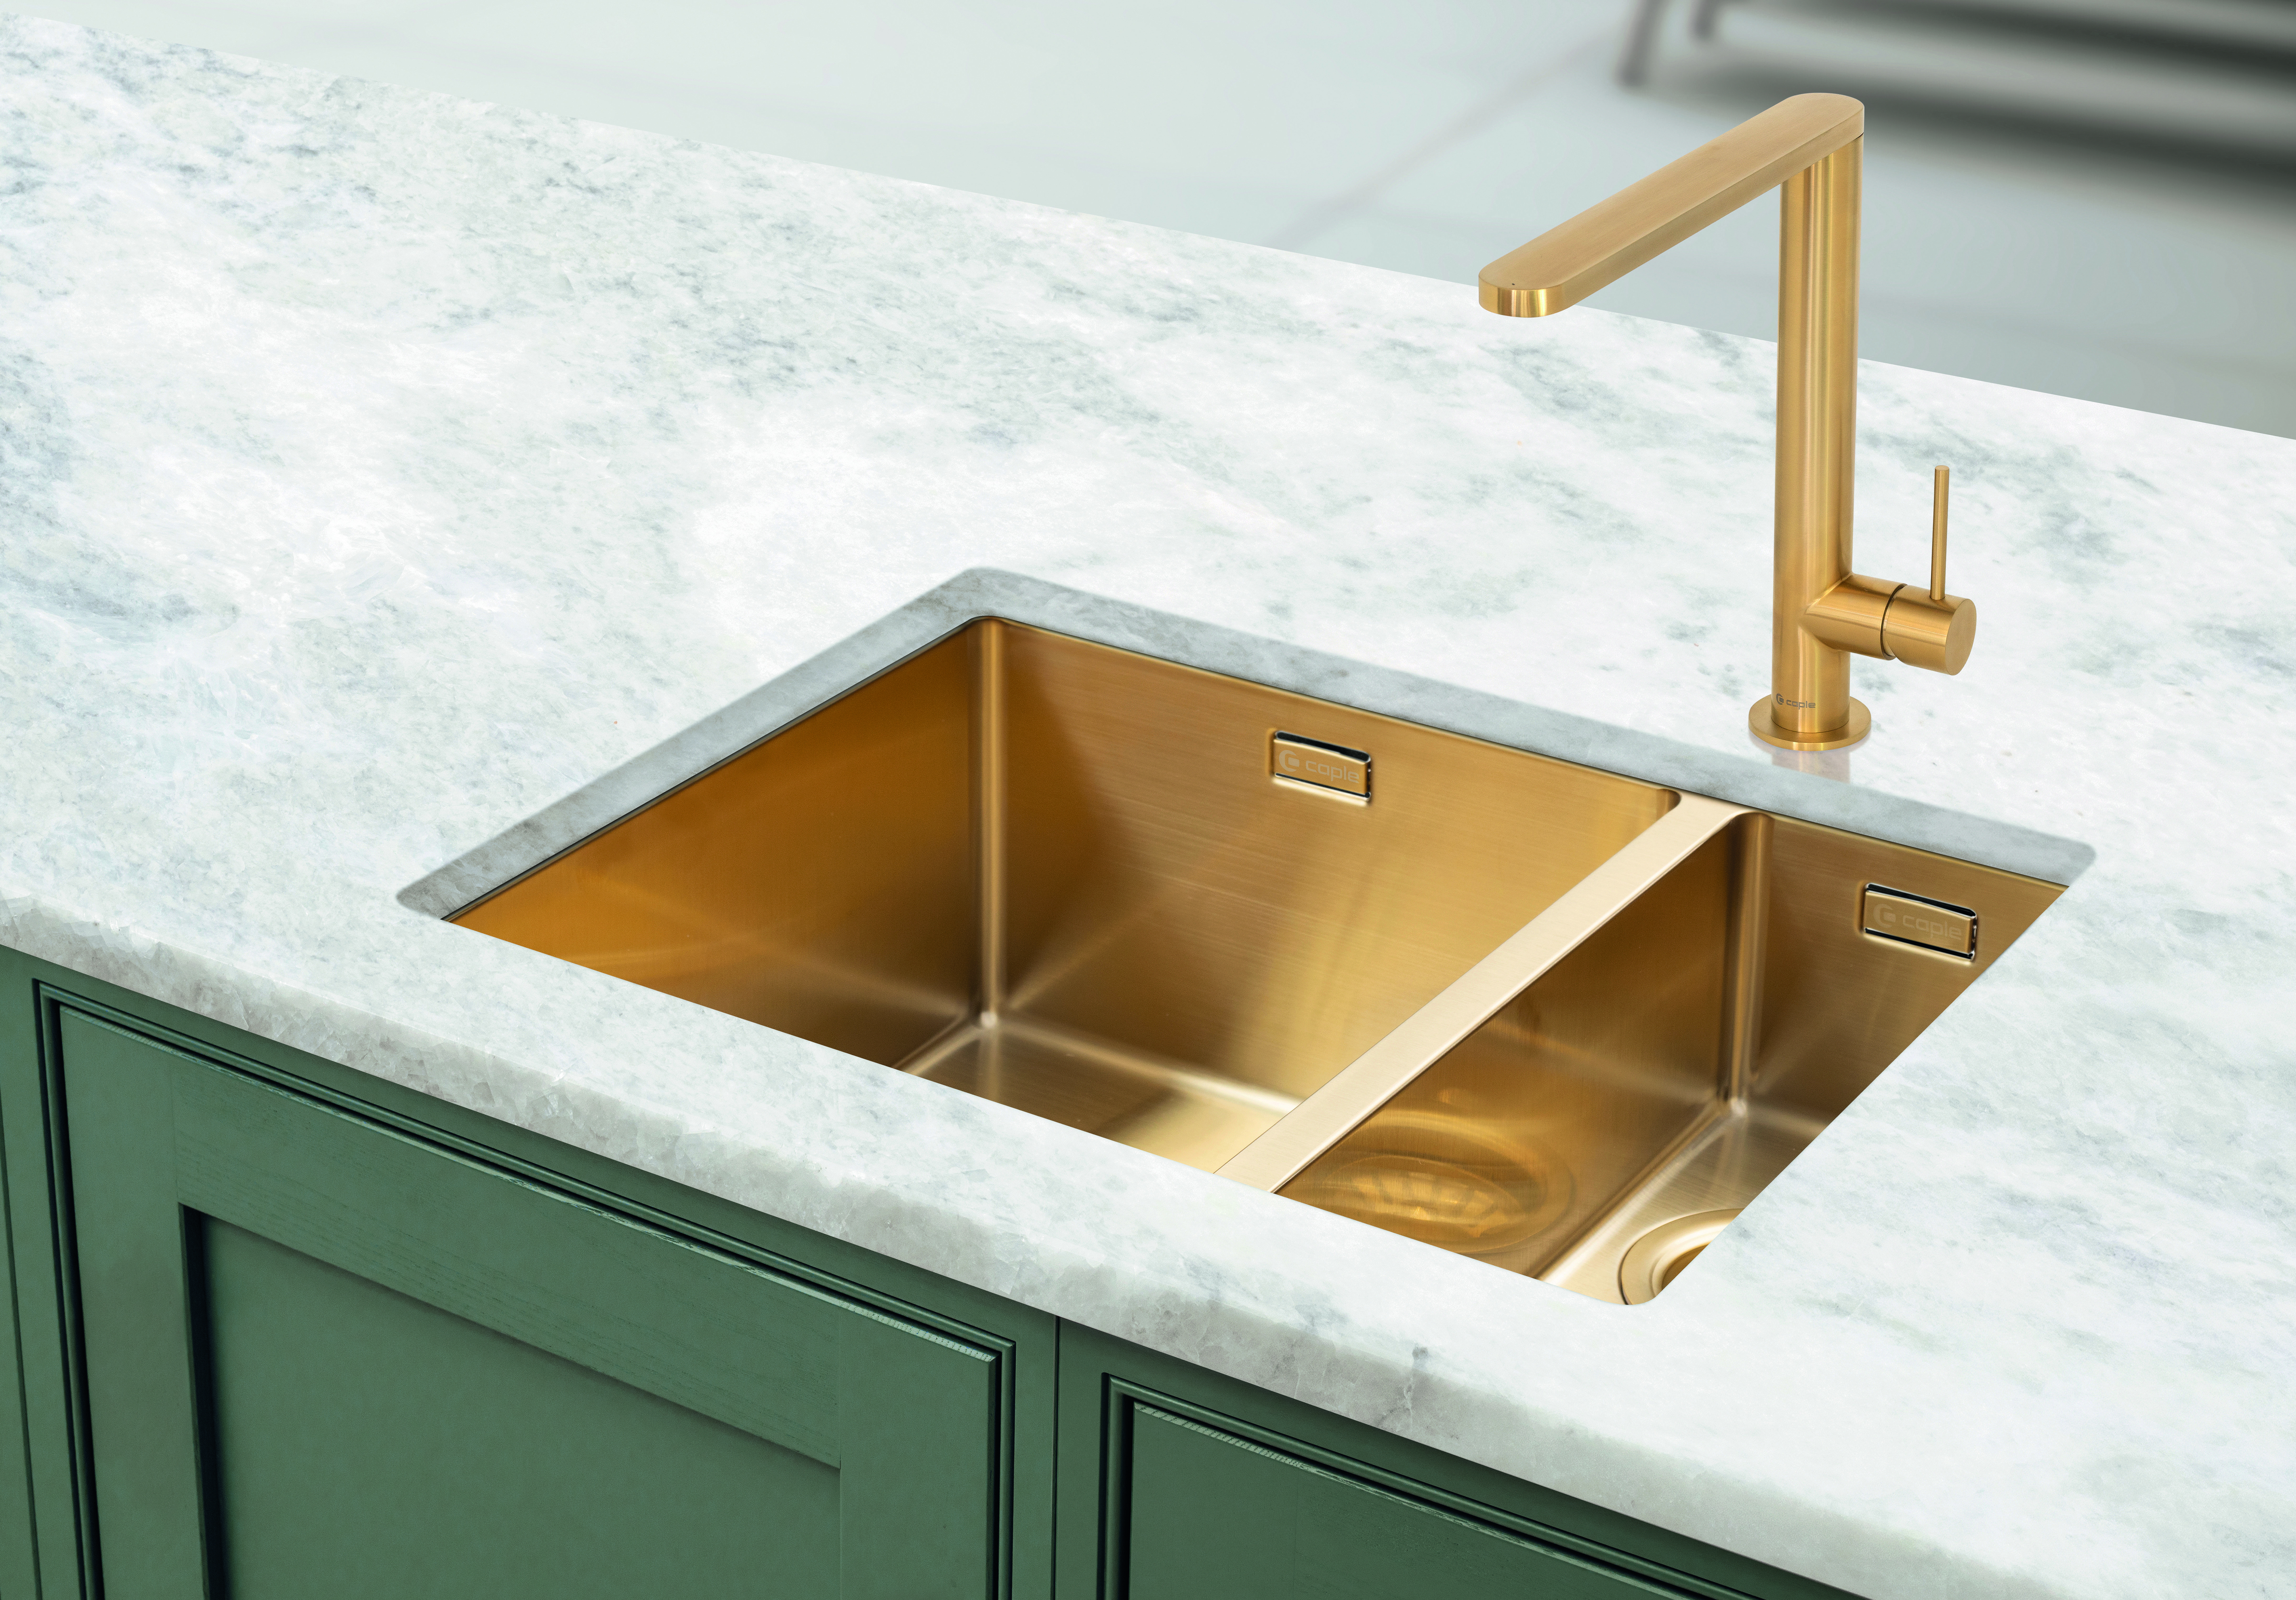 Mode Right handed Inset or Undermounted Sink in gold